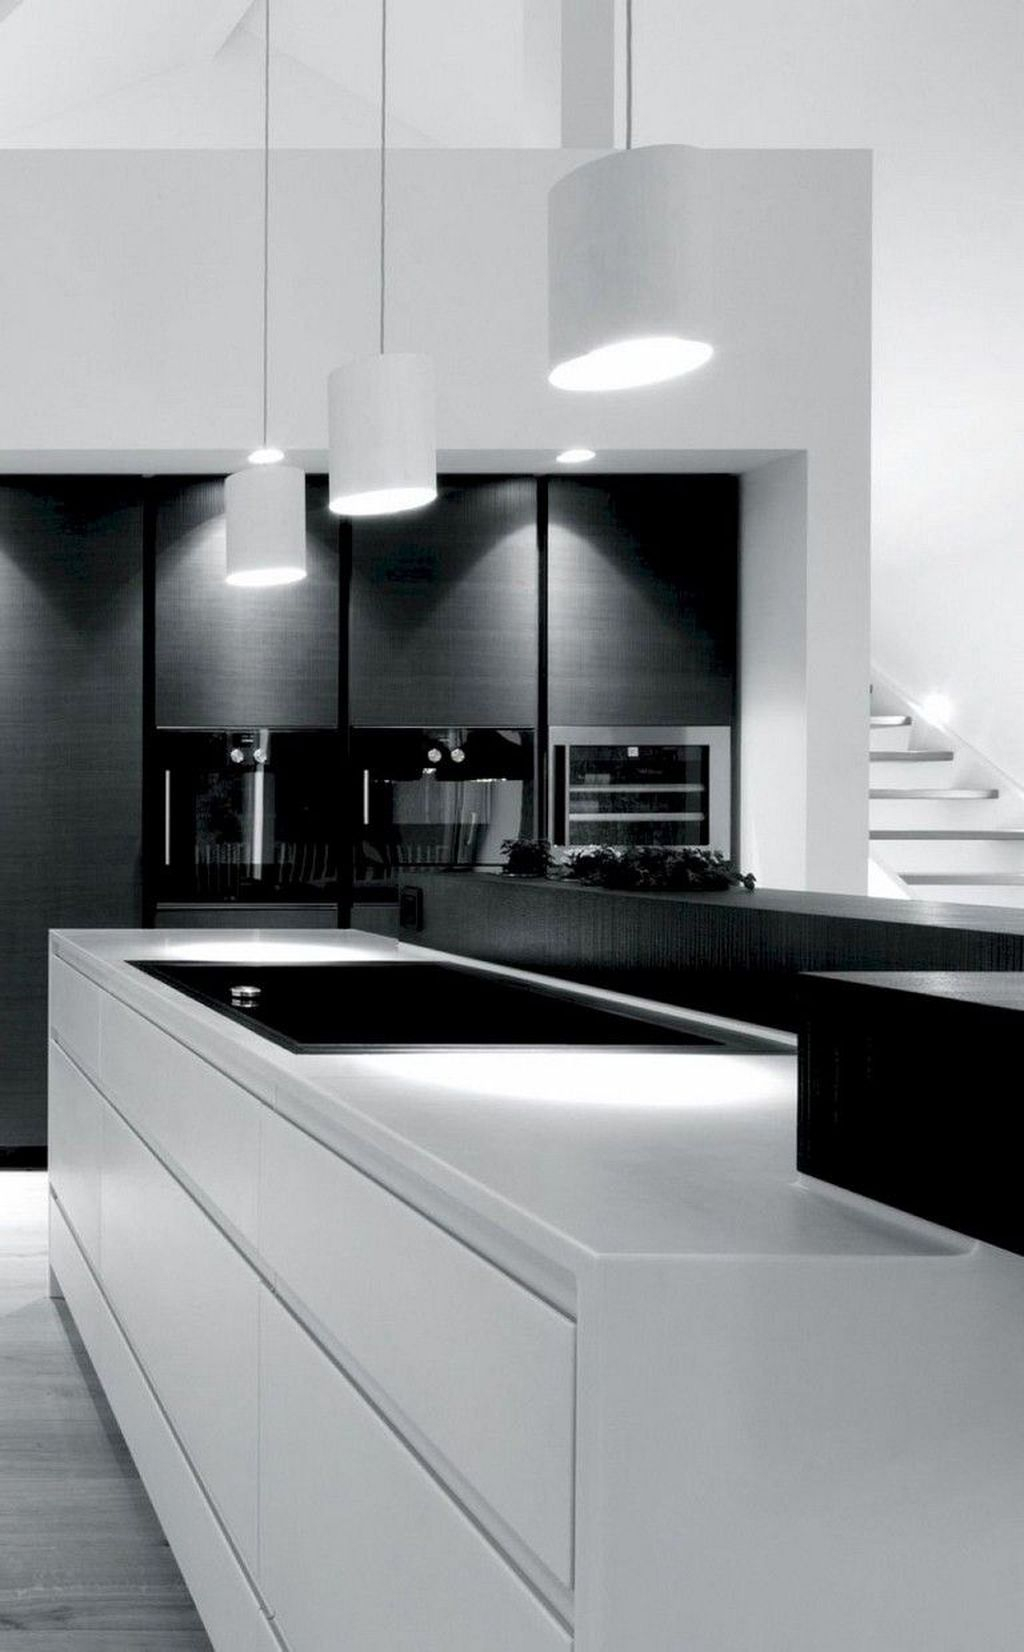 Elegant Minimalist Kitchen Design Ideas For Small Space To Try 35